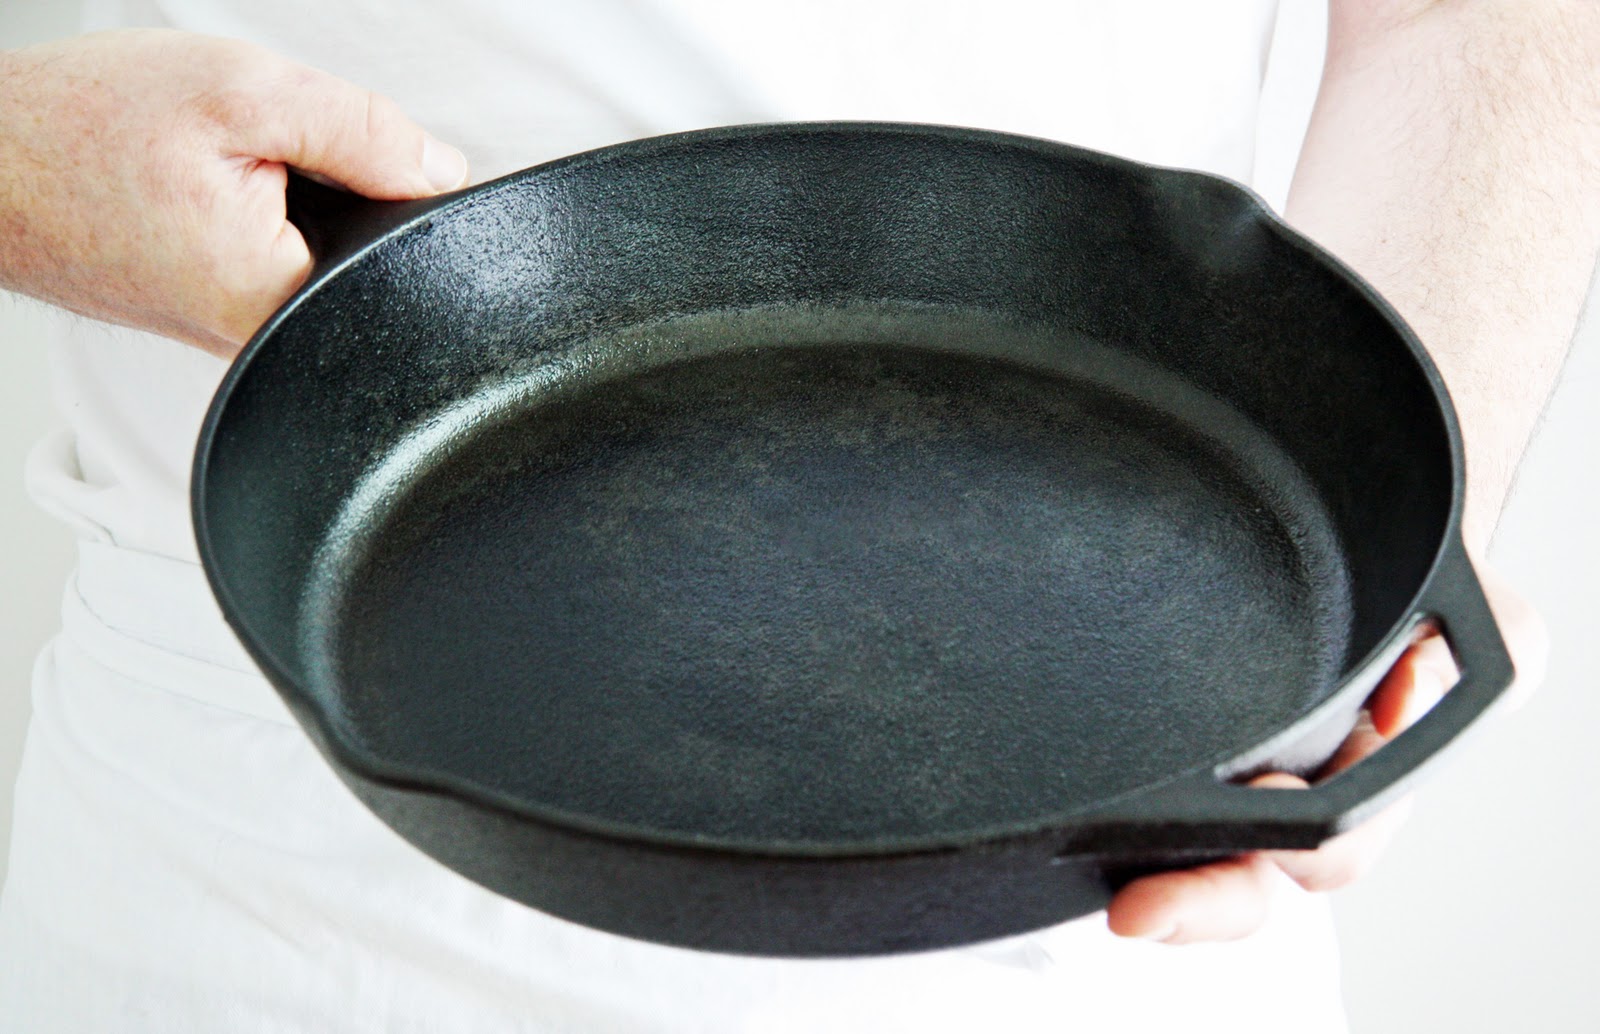 How to Season & Cook with Cast Iron to Make it Non-Stick